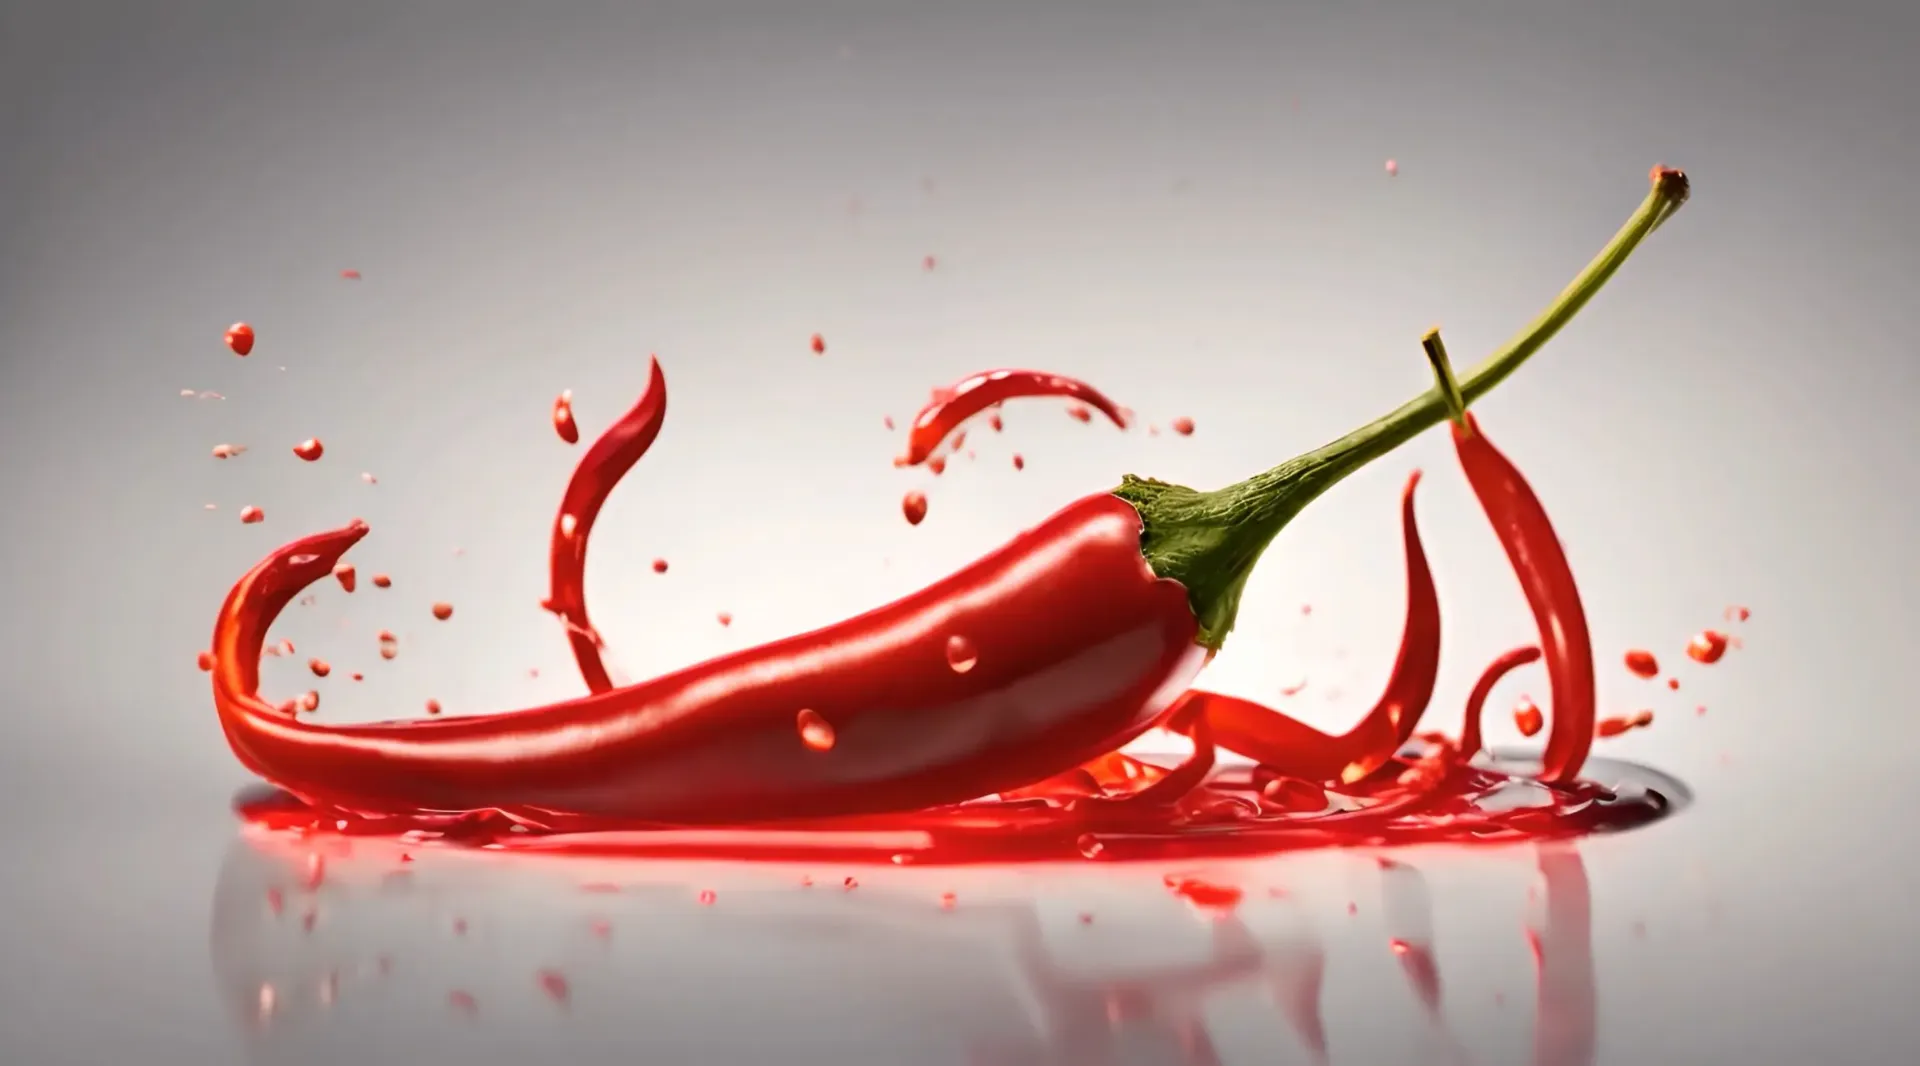 Spicy Red Pepper Surge Video Clip Backdrop